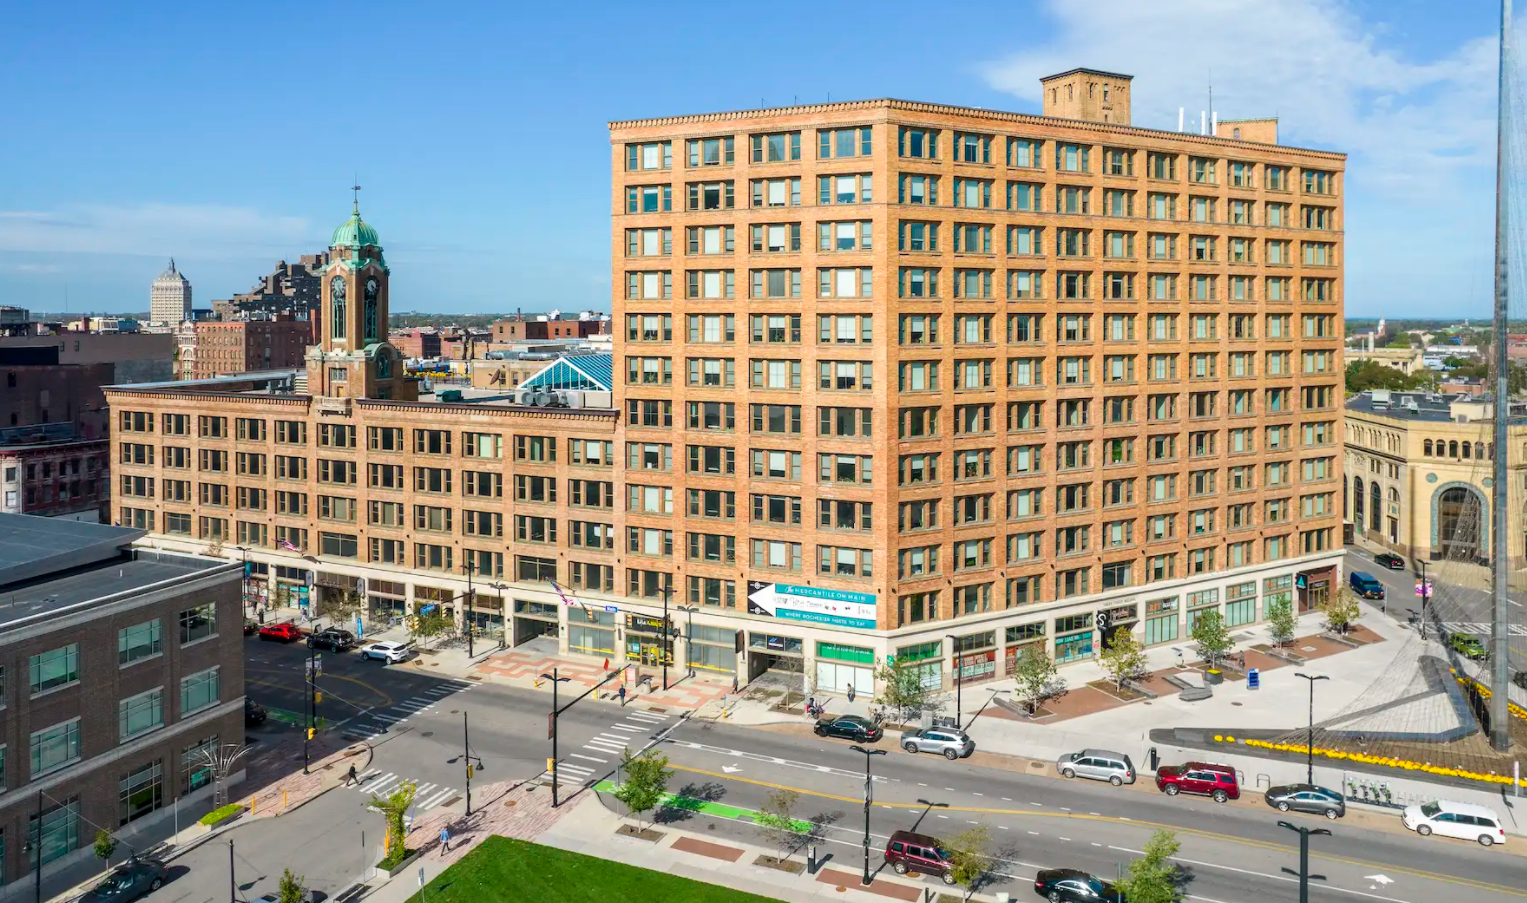 Former department store transformed into 1 million sf mixed-use complex